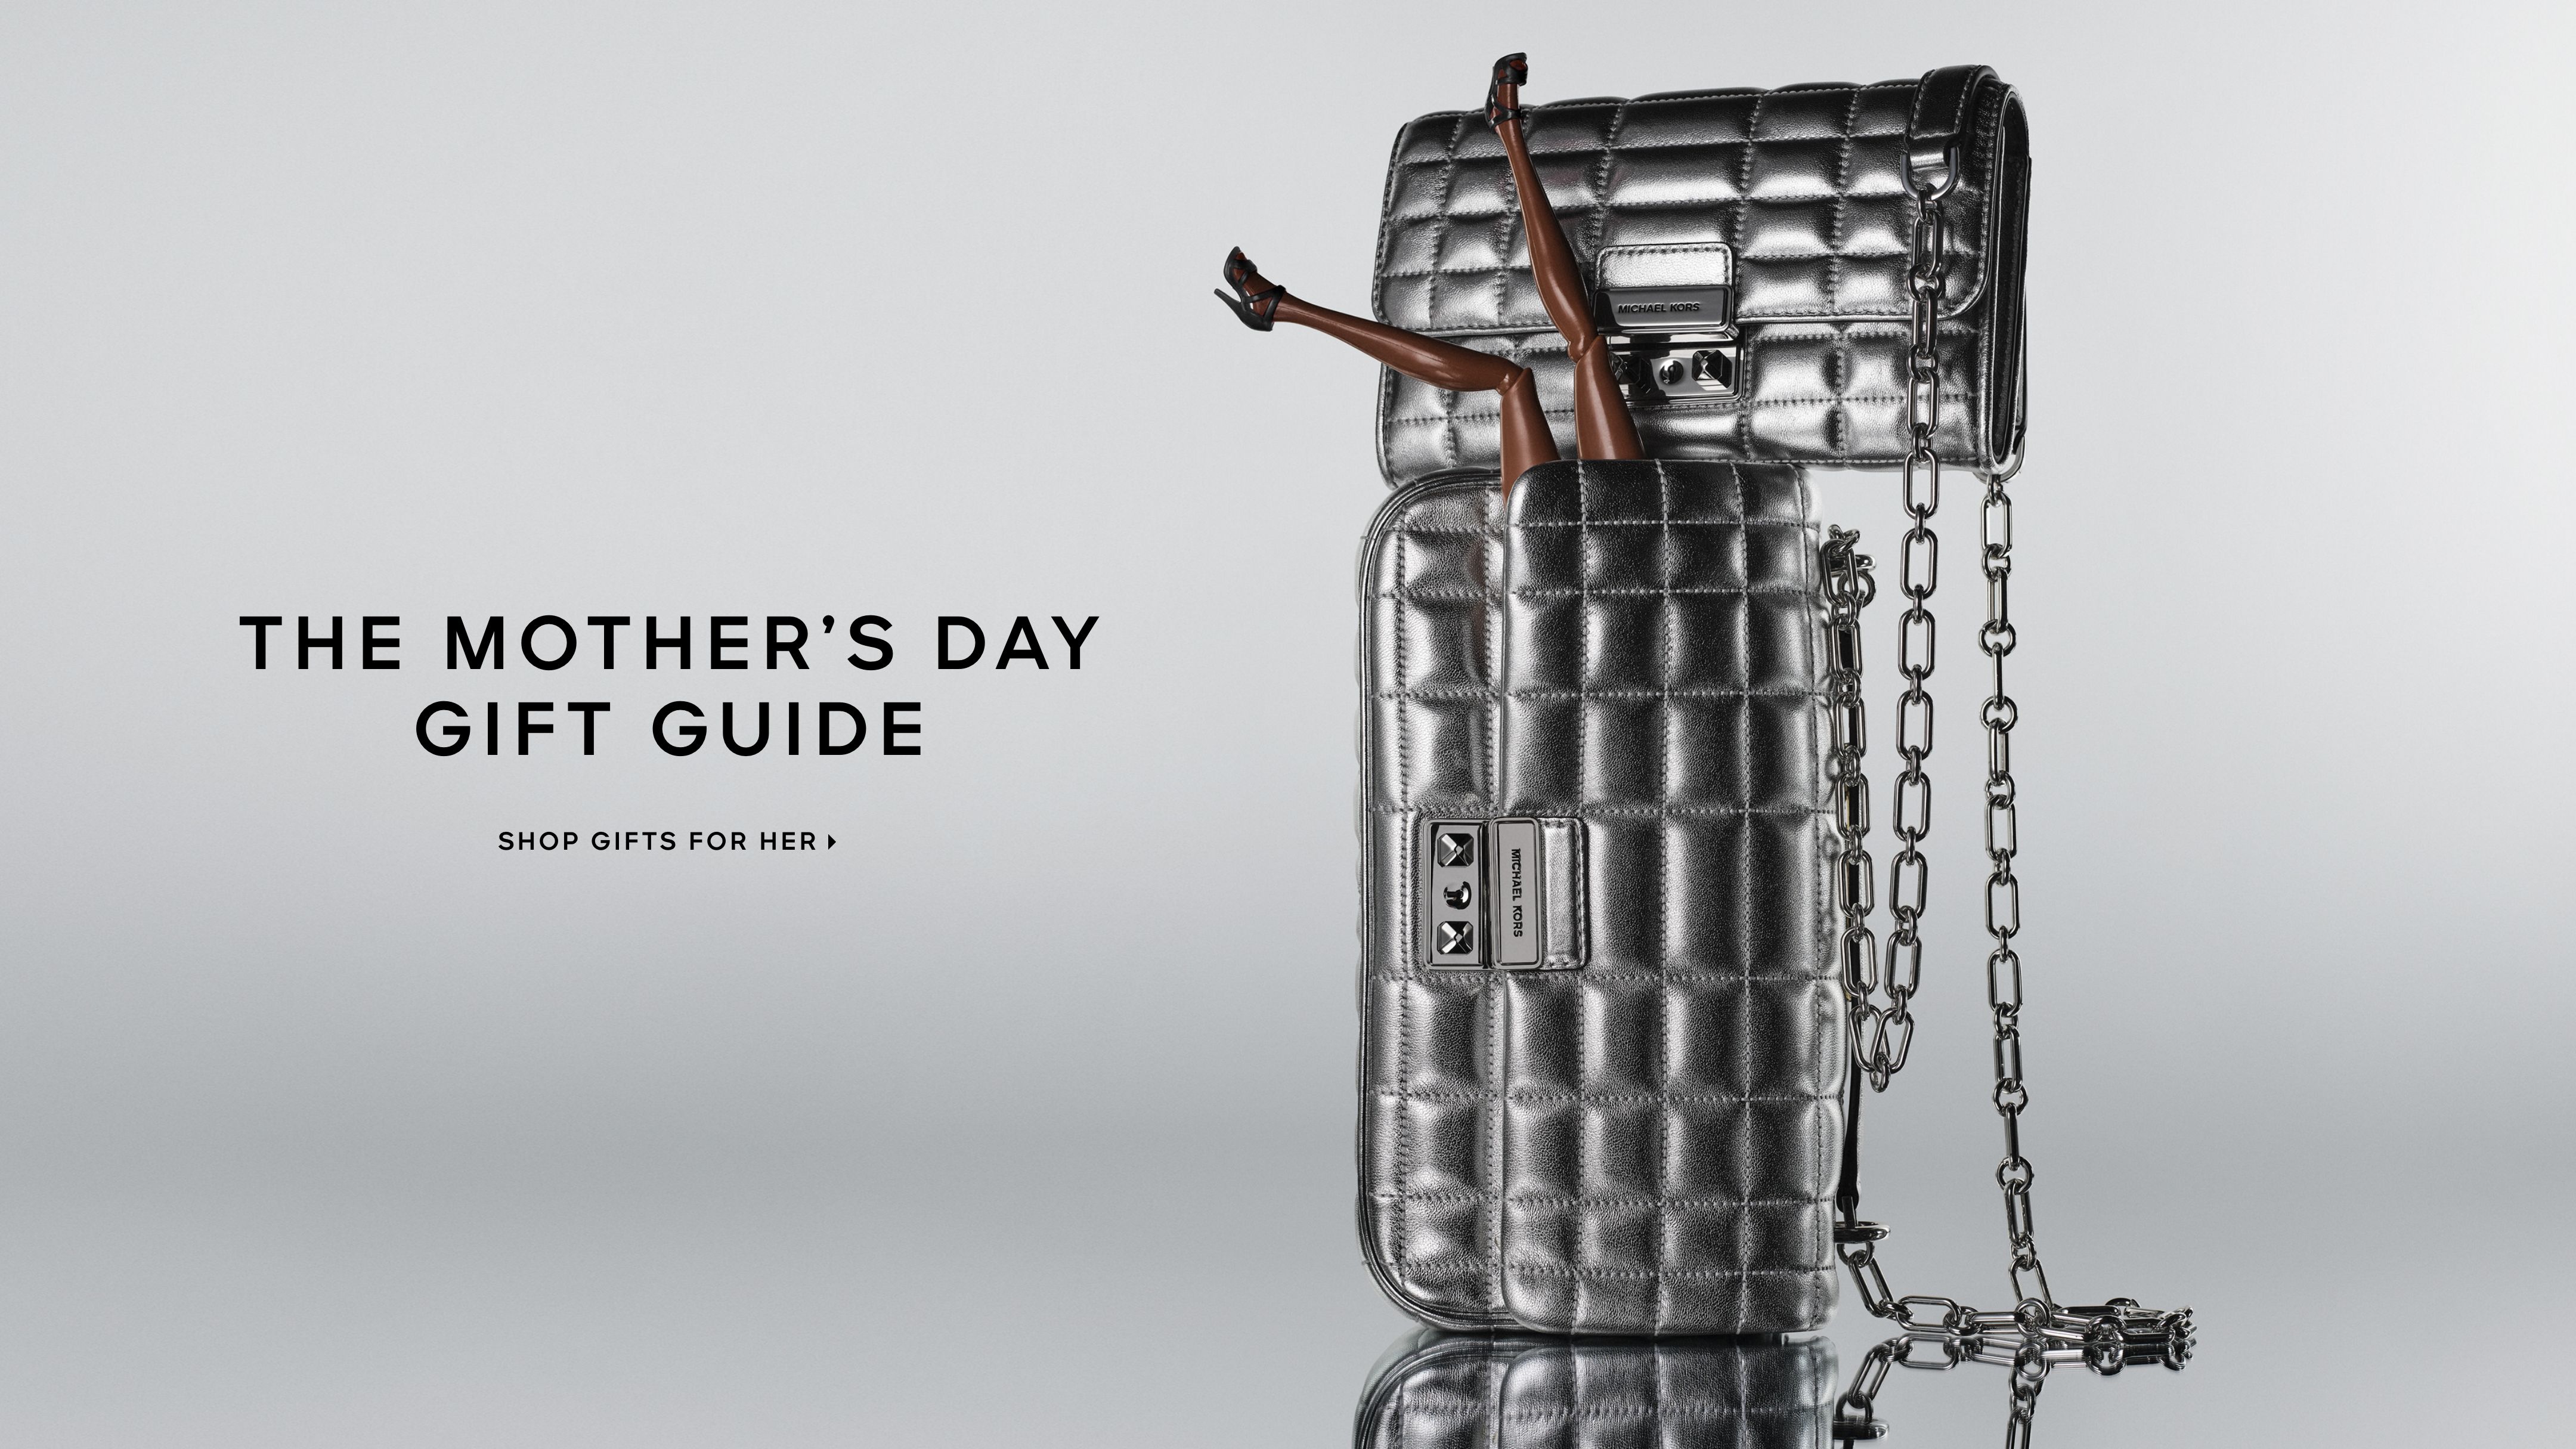 the mother's day gift guide. shop gifts for her.